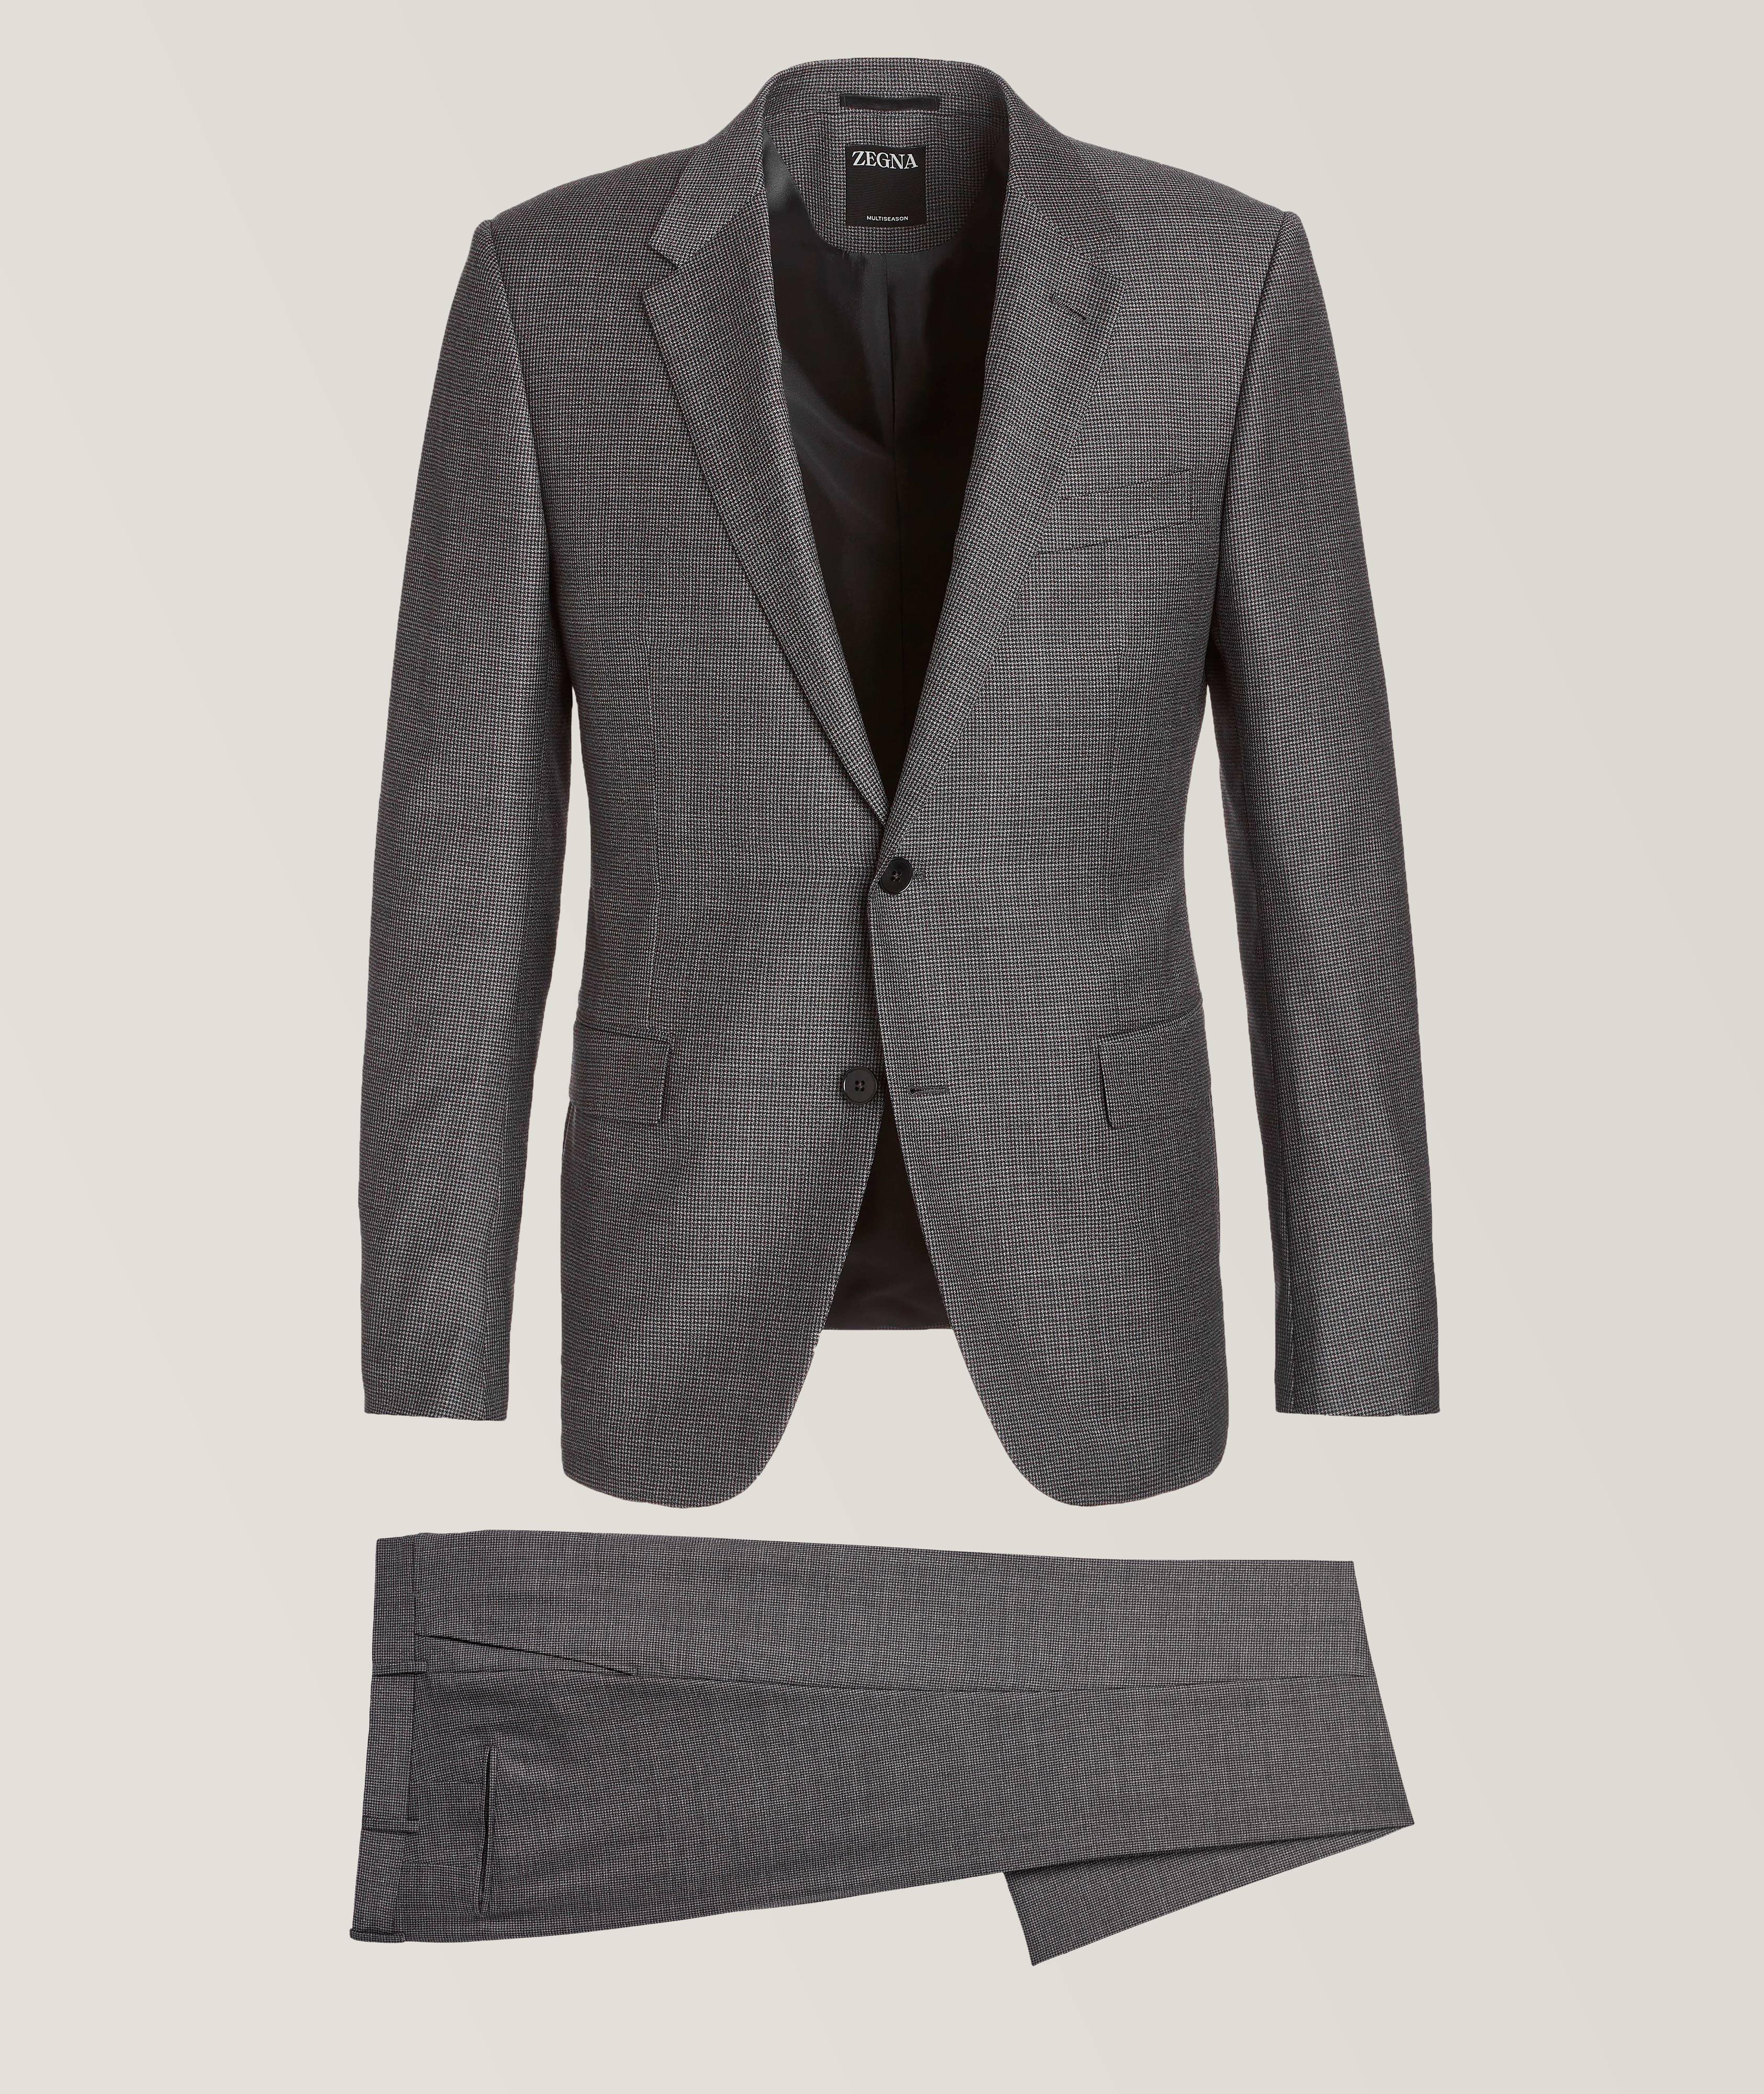 Zegna Fitted Multiseason Miniature Houndstooth Pattern Suit